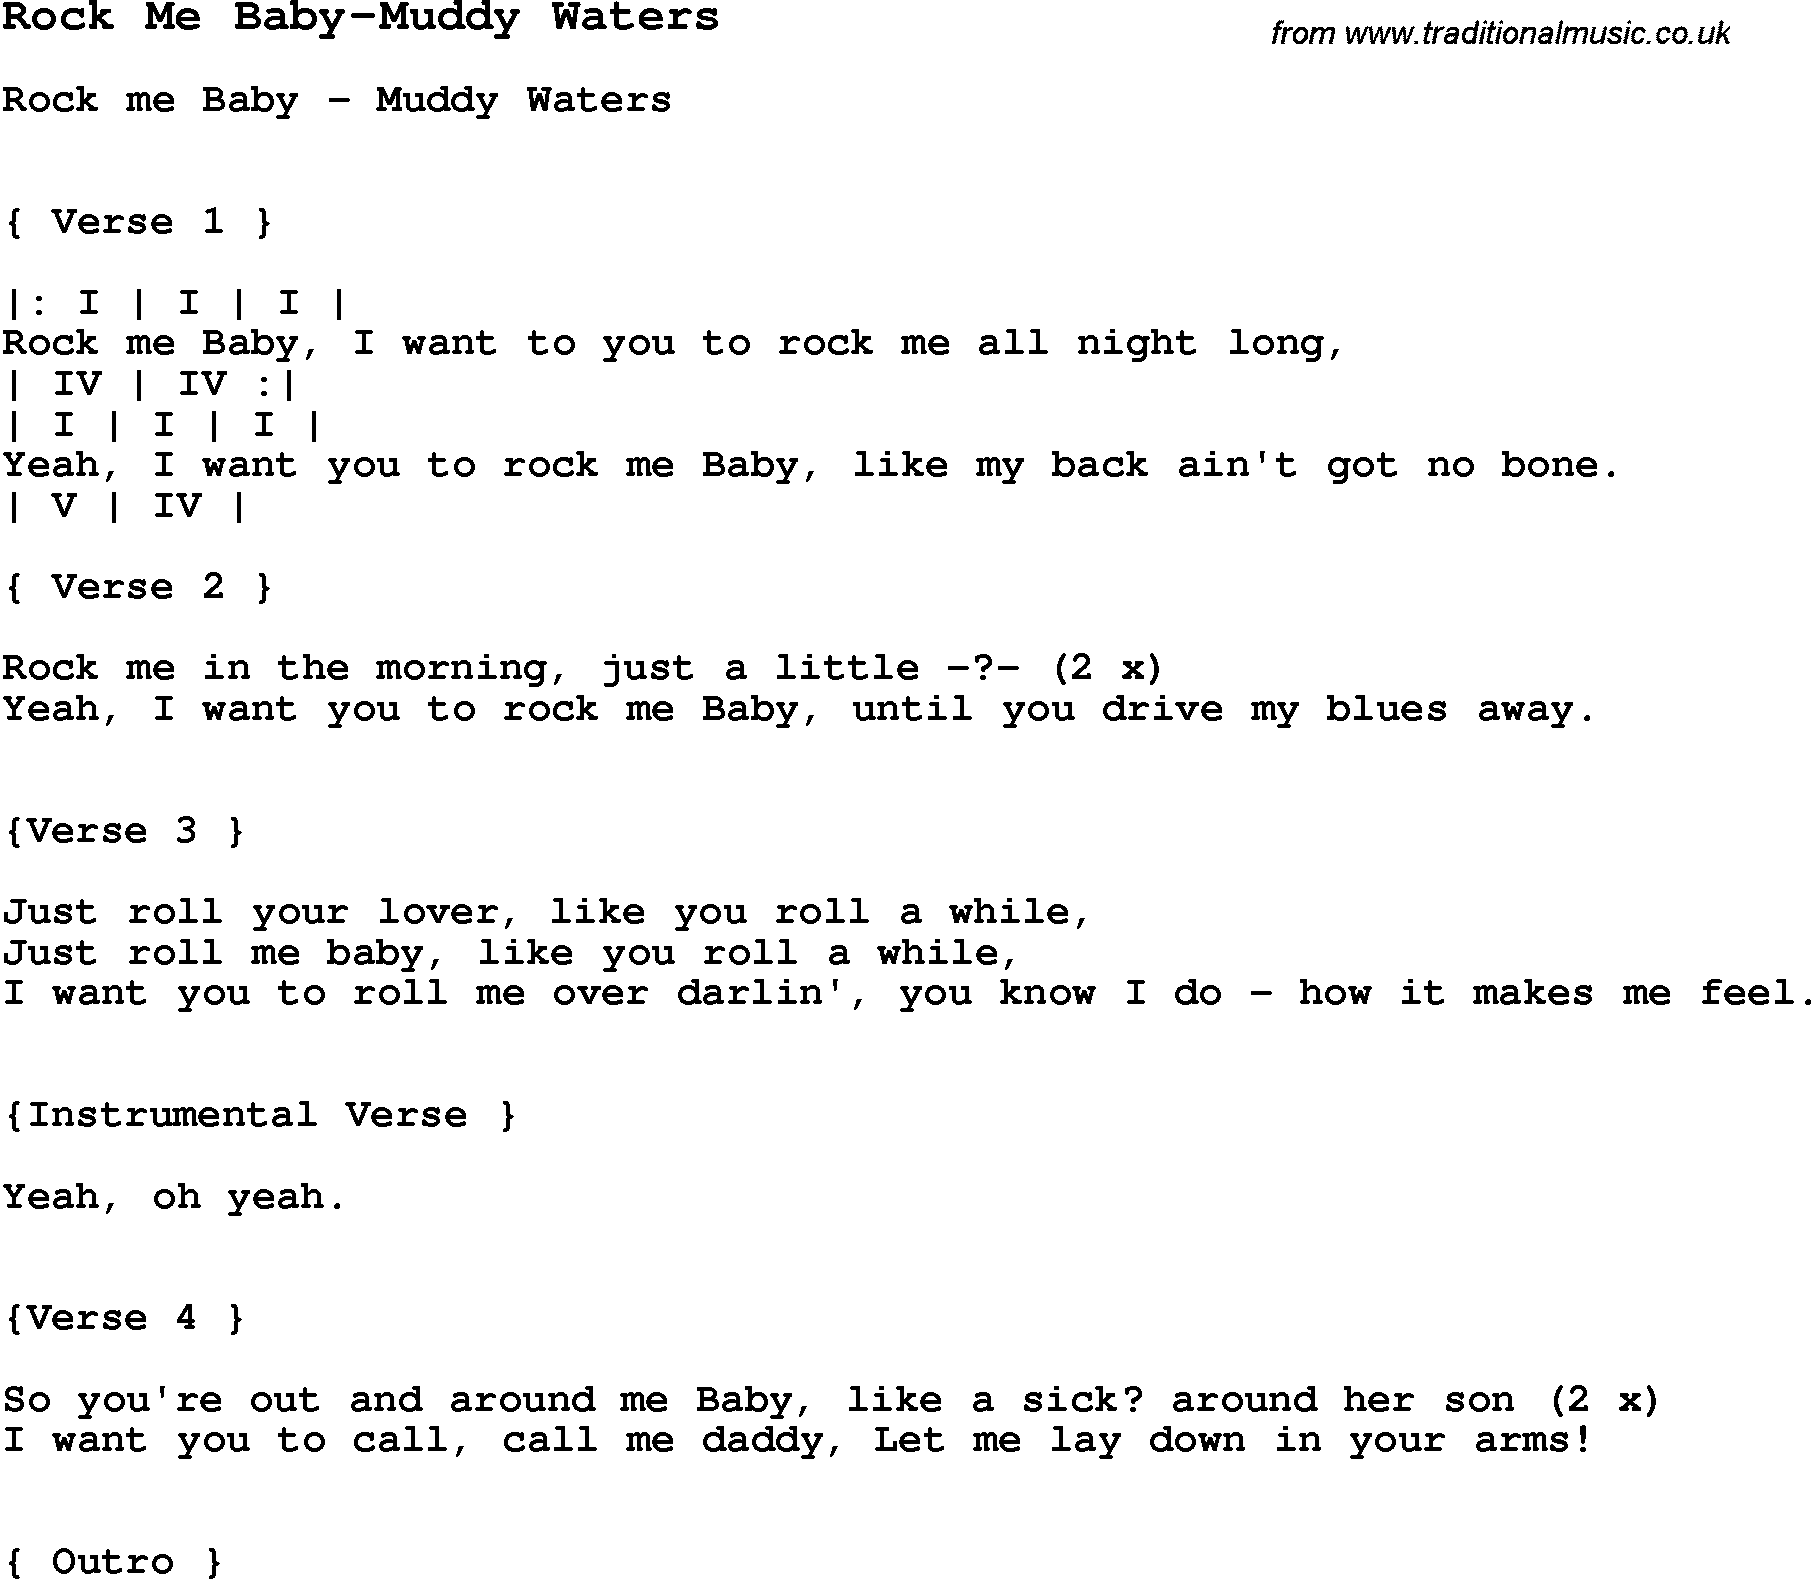 Blues Guitar Song, lyrics, chords, tablature, playing hints for Rock Me Baby-Muddy Waters